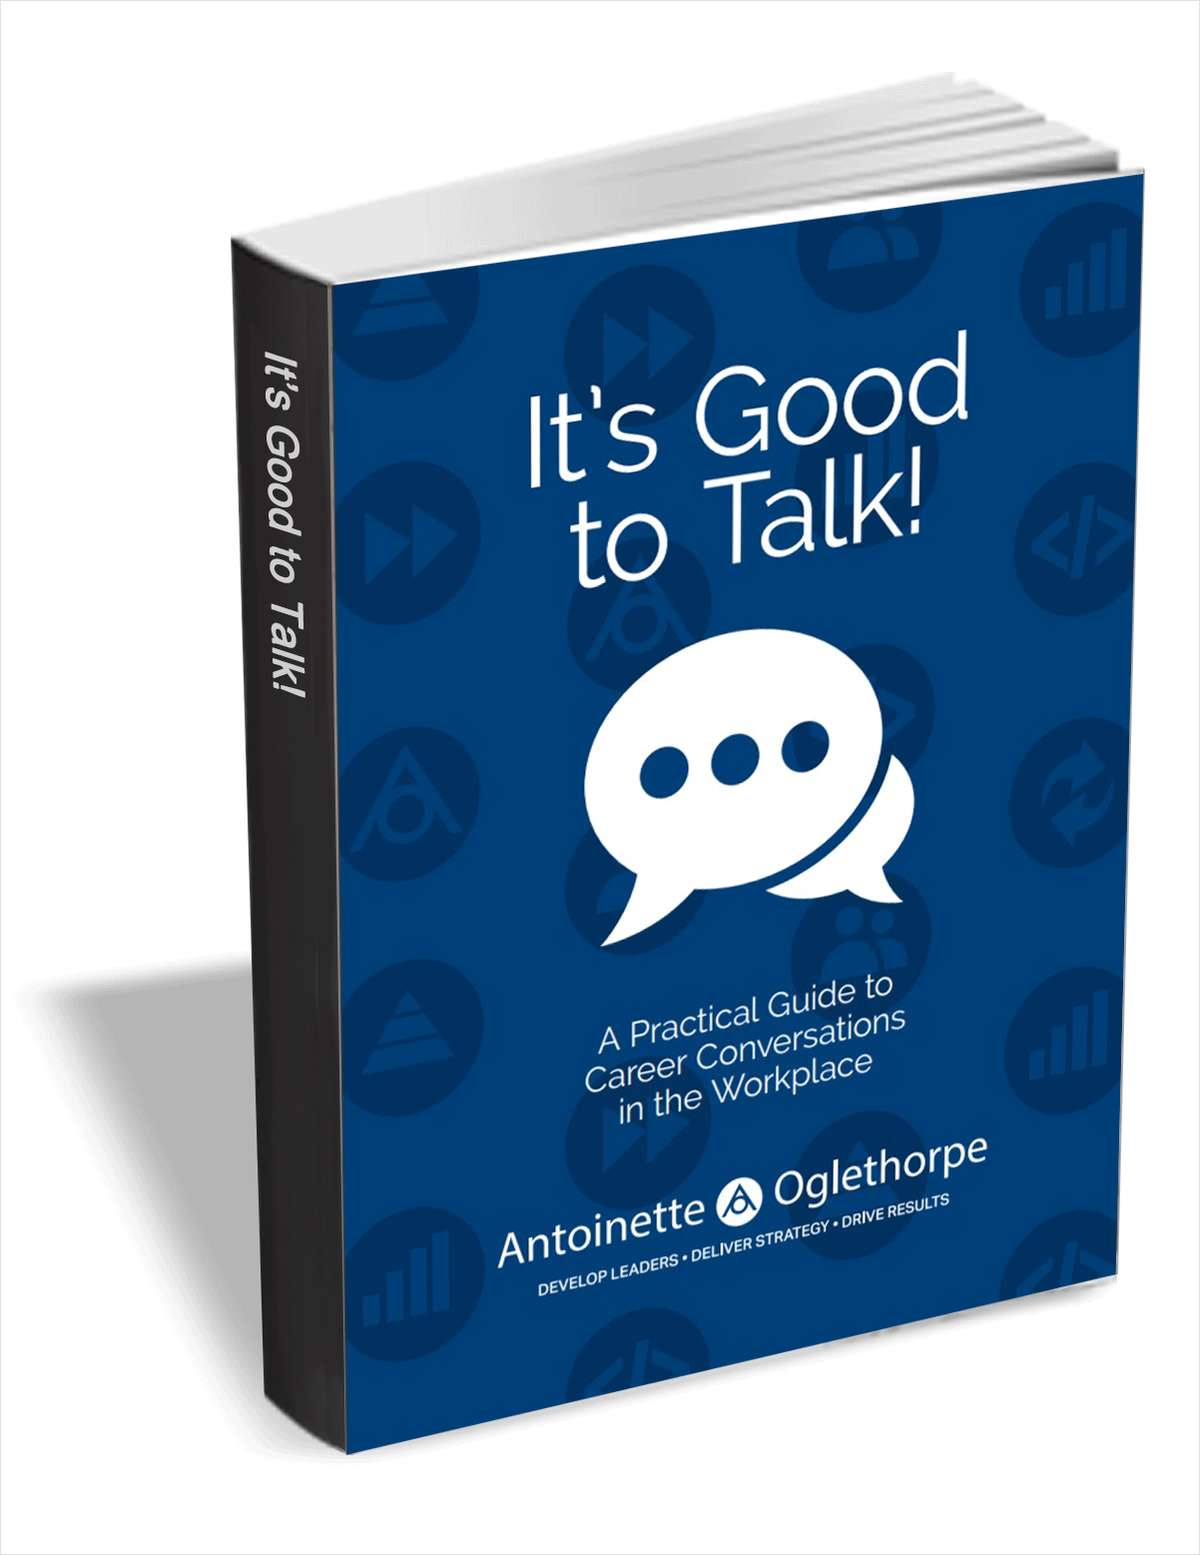 It's Good to Talk - A Practical Guide to Career Conversations in the Workplace